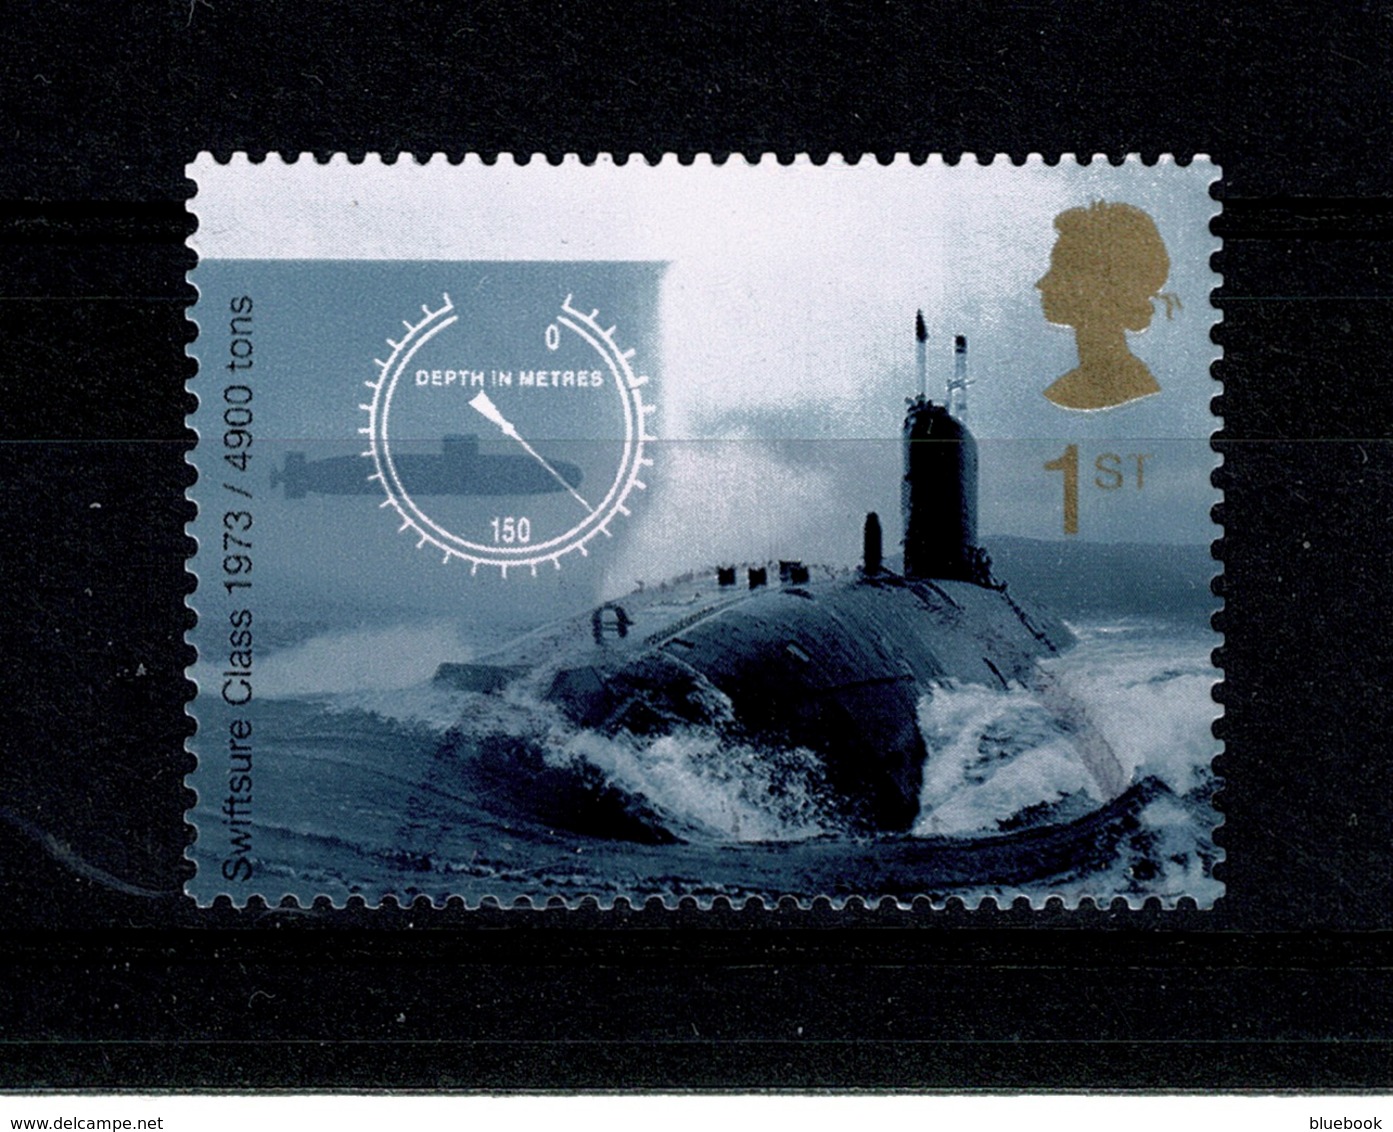 Ref 1342 - GB 2001 - 1st Class Submarines Self Adhesive Stamp - Fine Used Stamp Cat £30+ - Used Stamps